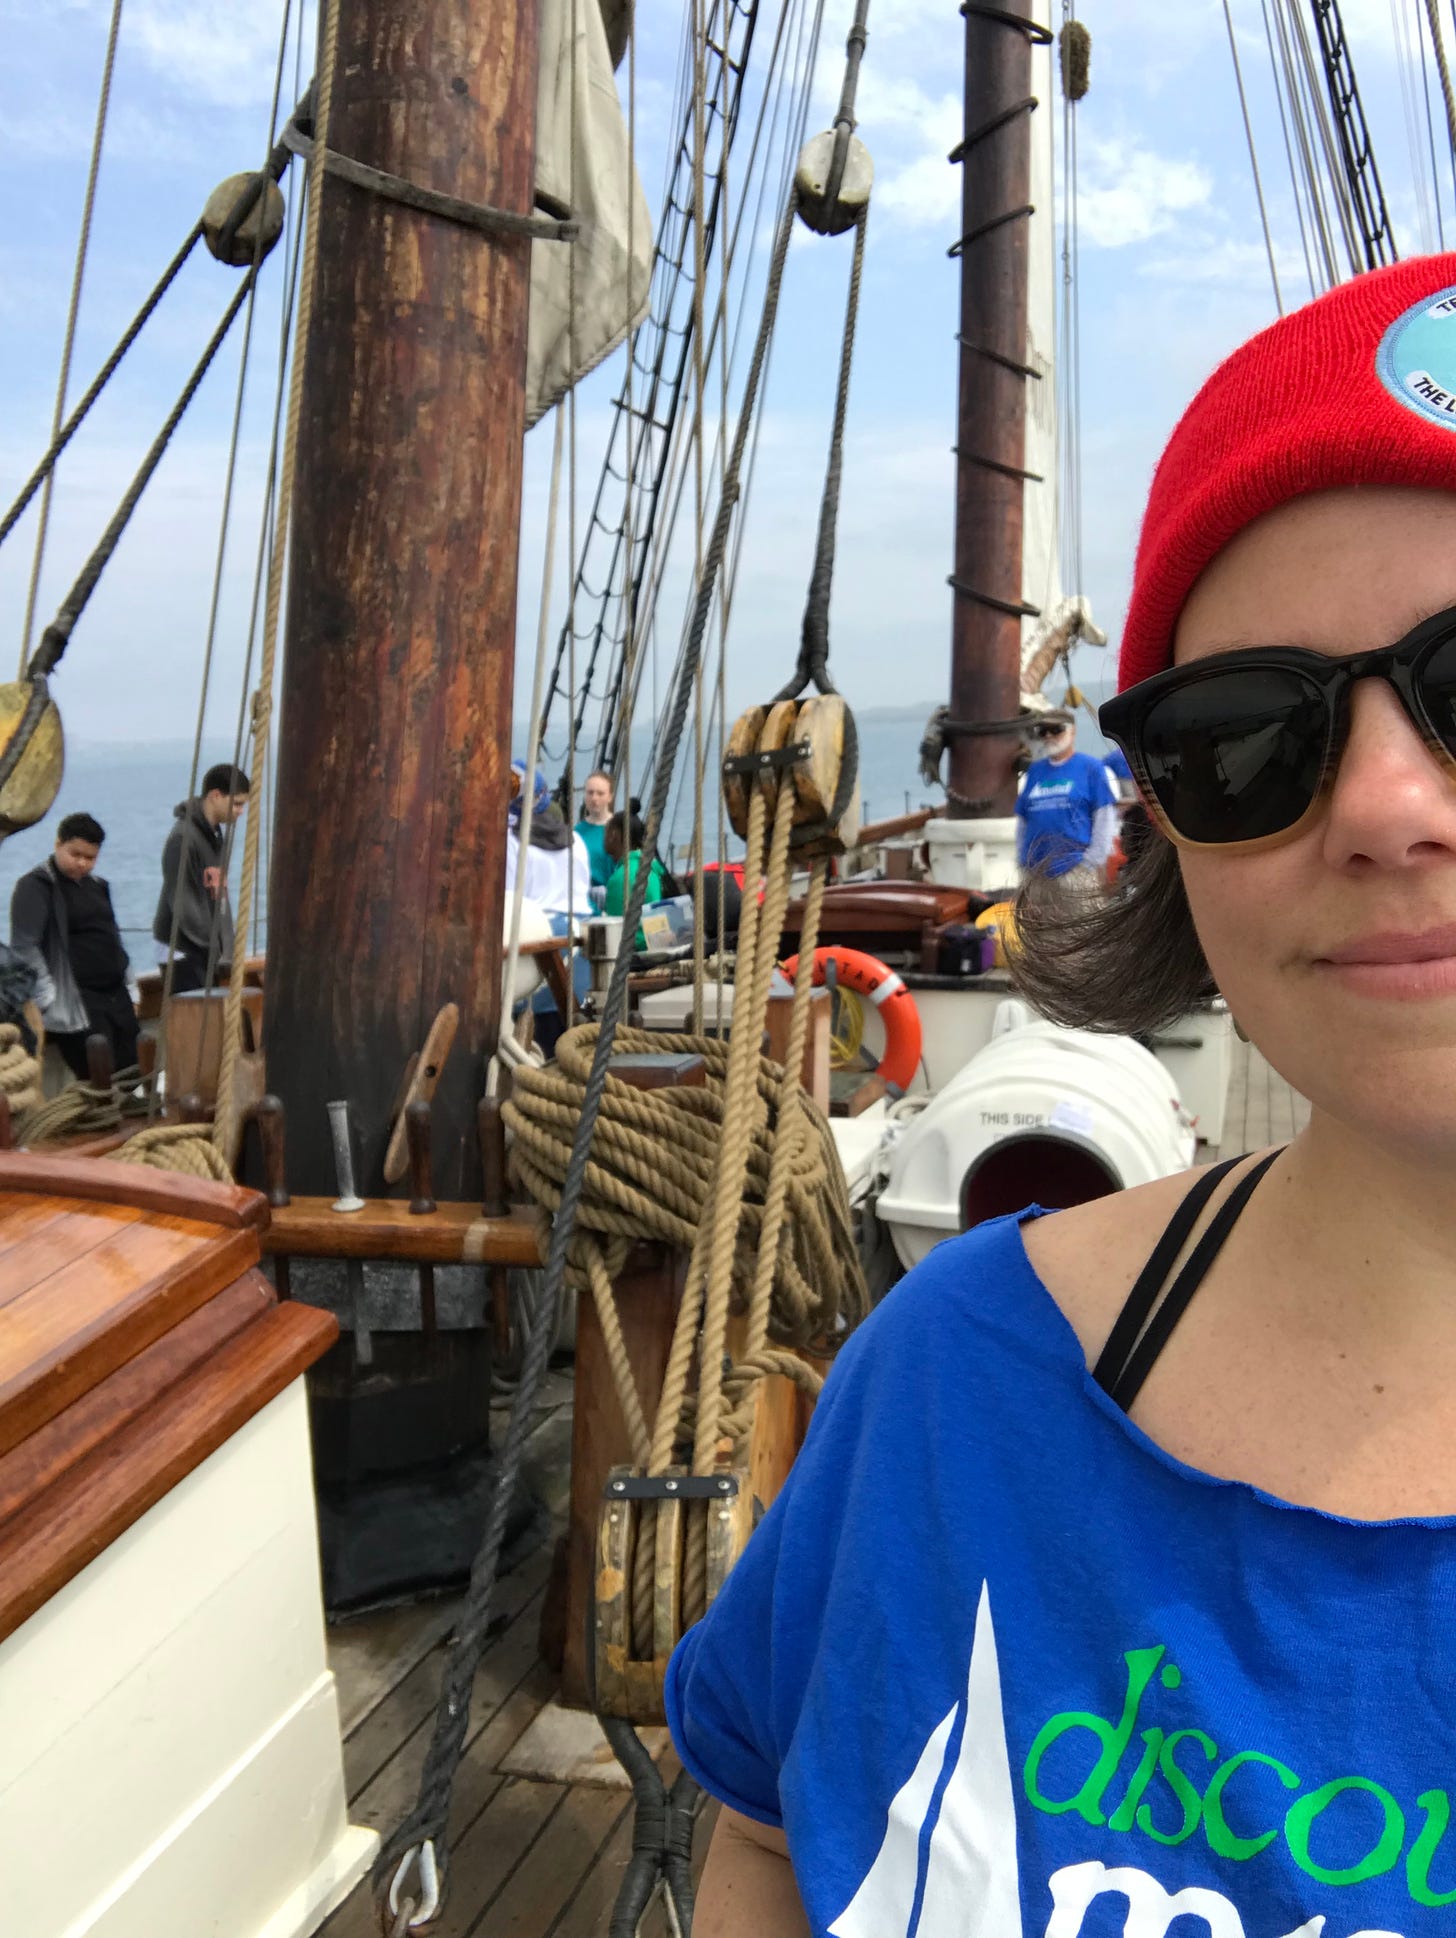 Anne Bryant crewing aboard AMISTAD, a Baltimore clipper built for educational purposes. Students in the background are attending educational programming stations about African culture and the special place AMISTAD has in American history while the boat is under way.